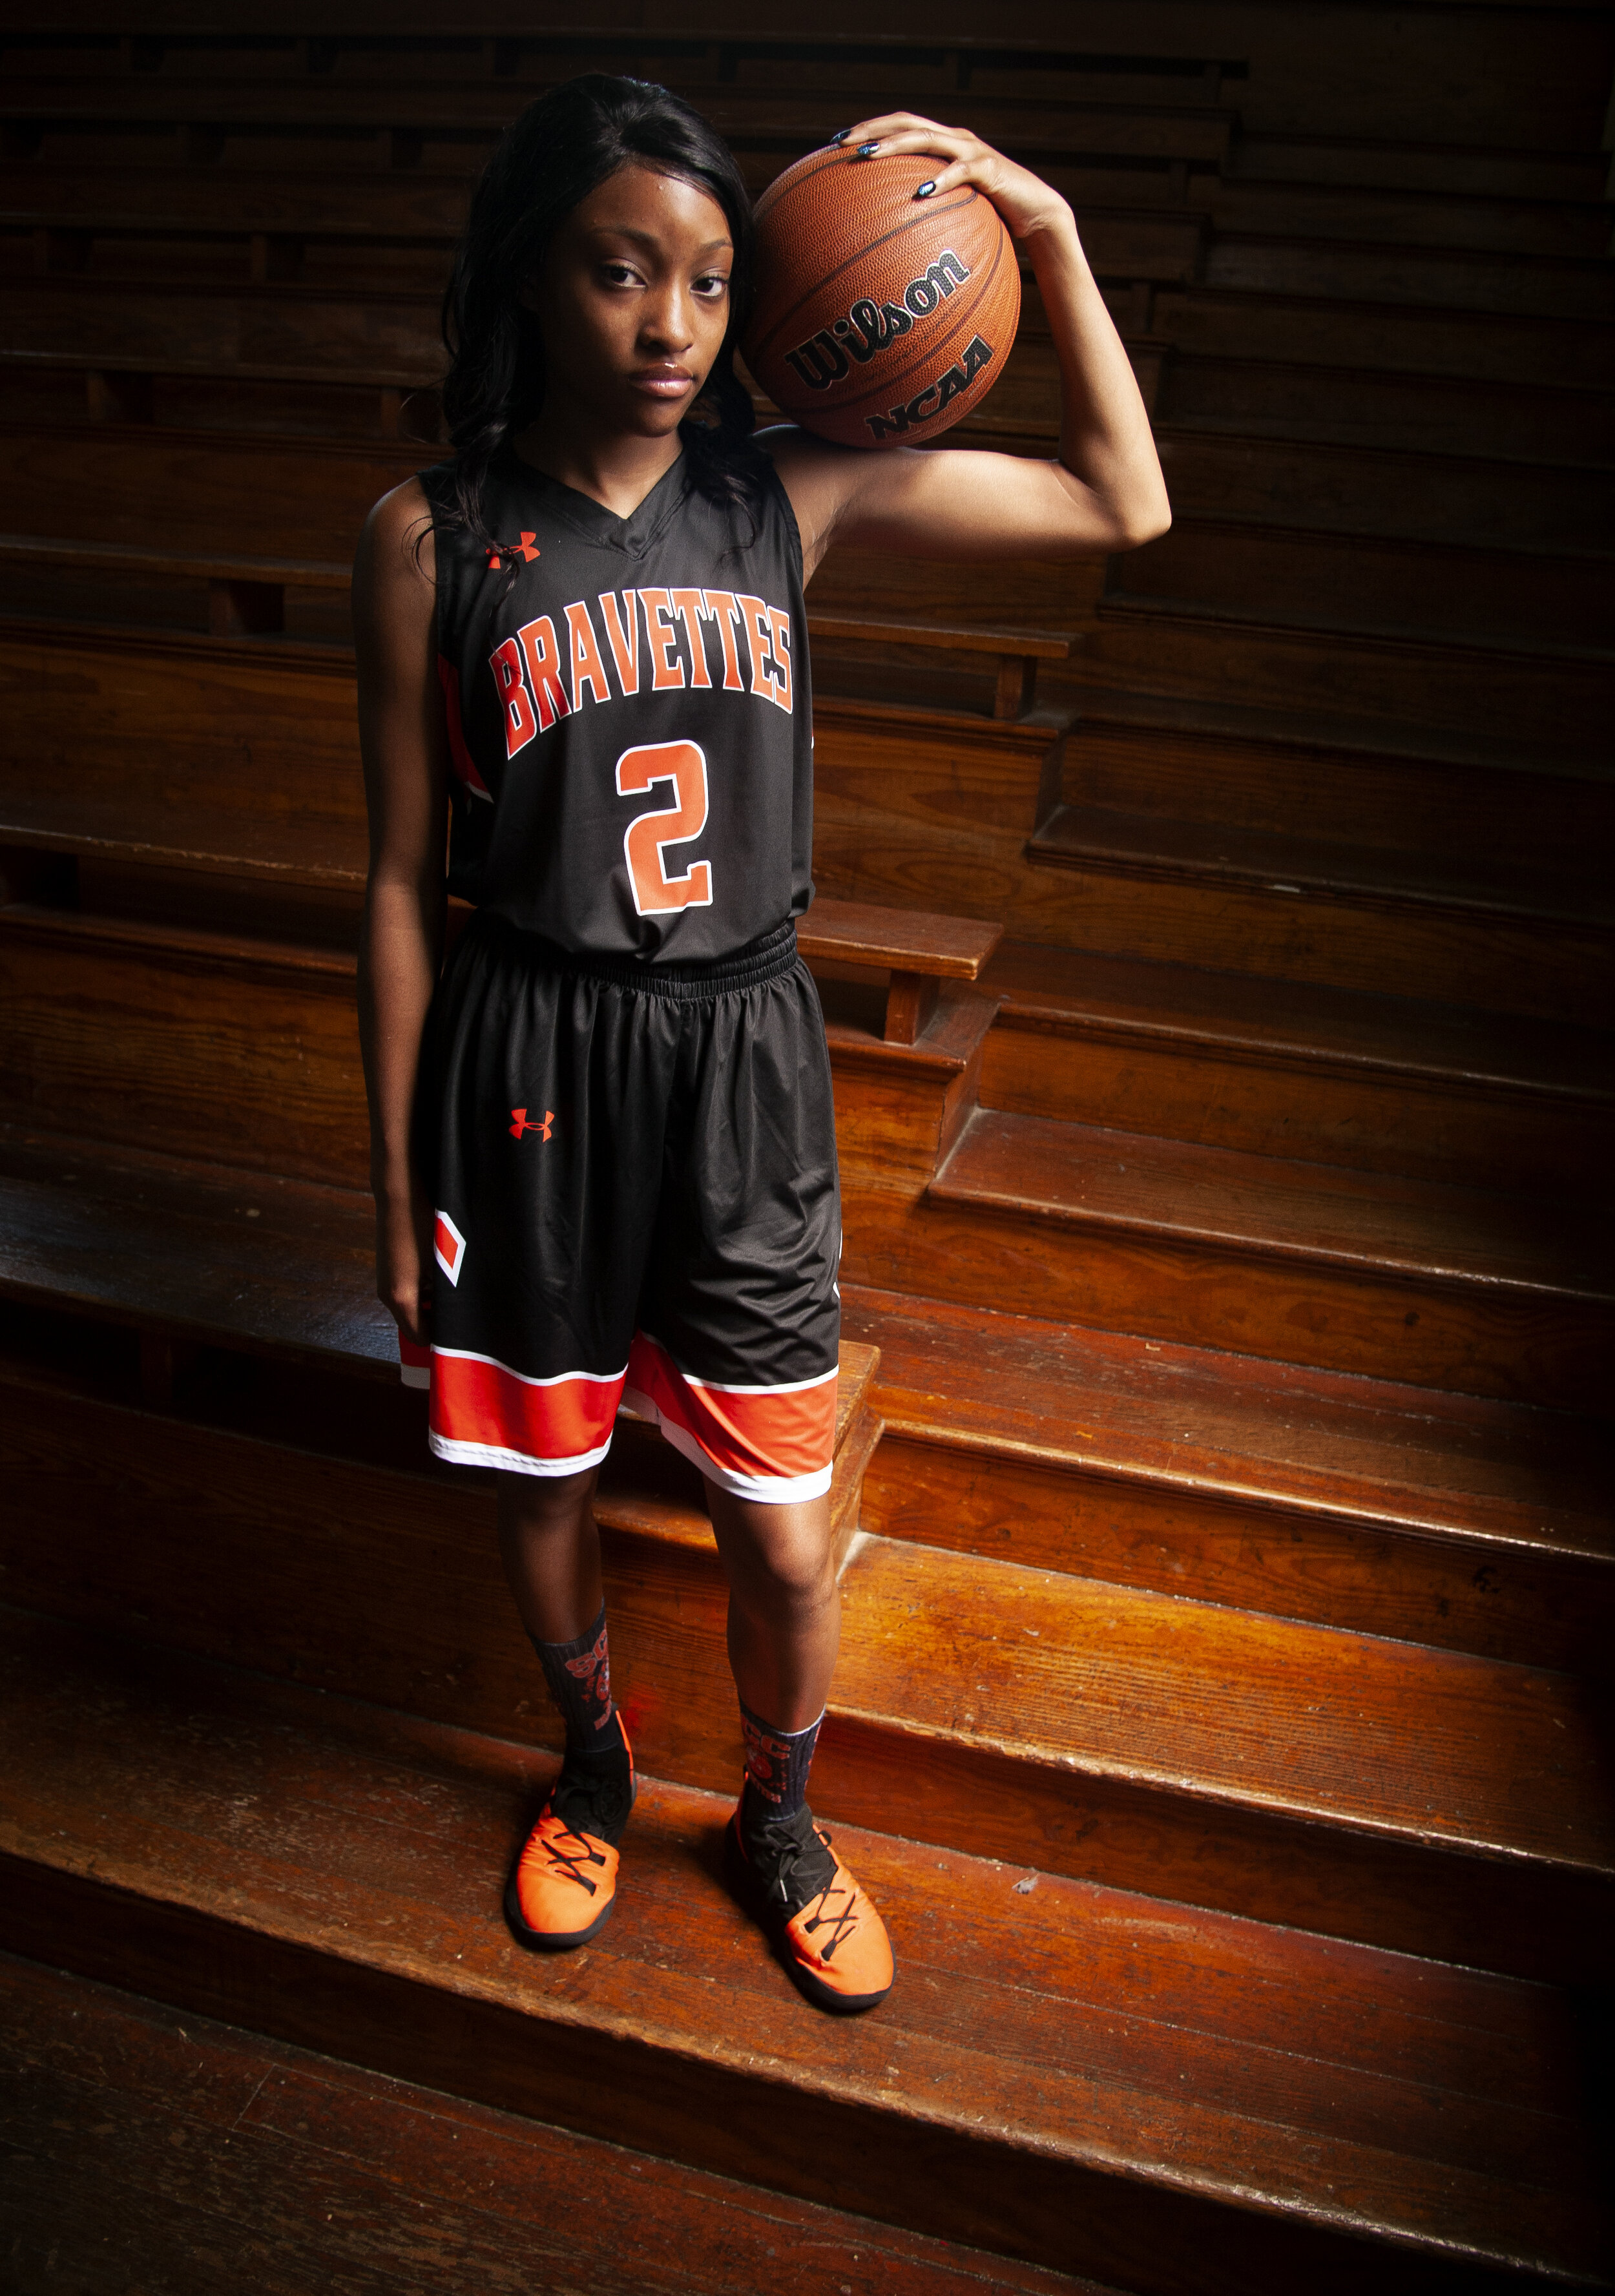  All-Missourian athlete, Scott County Central's Trinity Thomas, poses for a portrait April 28 at the Old Jackson Gym in Jackson, Missouri.  